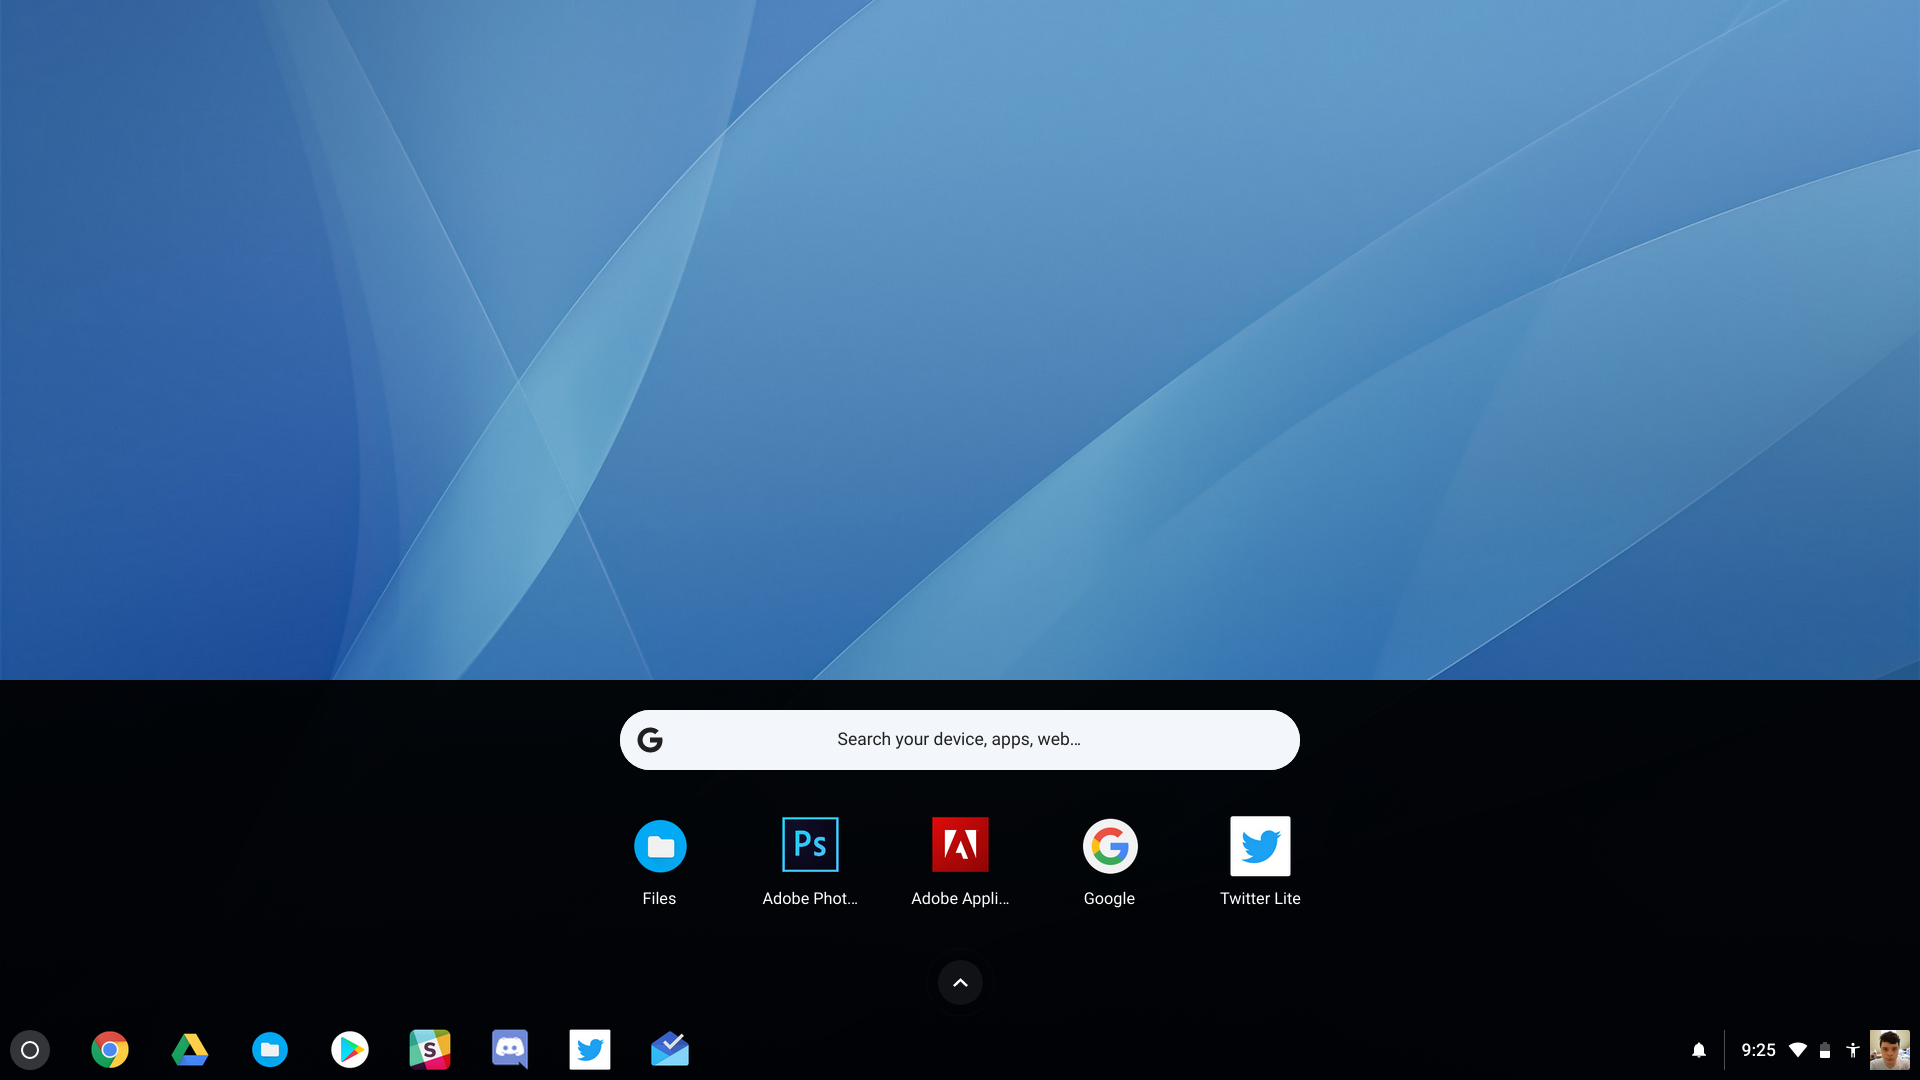 chrome os v61 rolls out with new lock screen, new app drawer and more